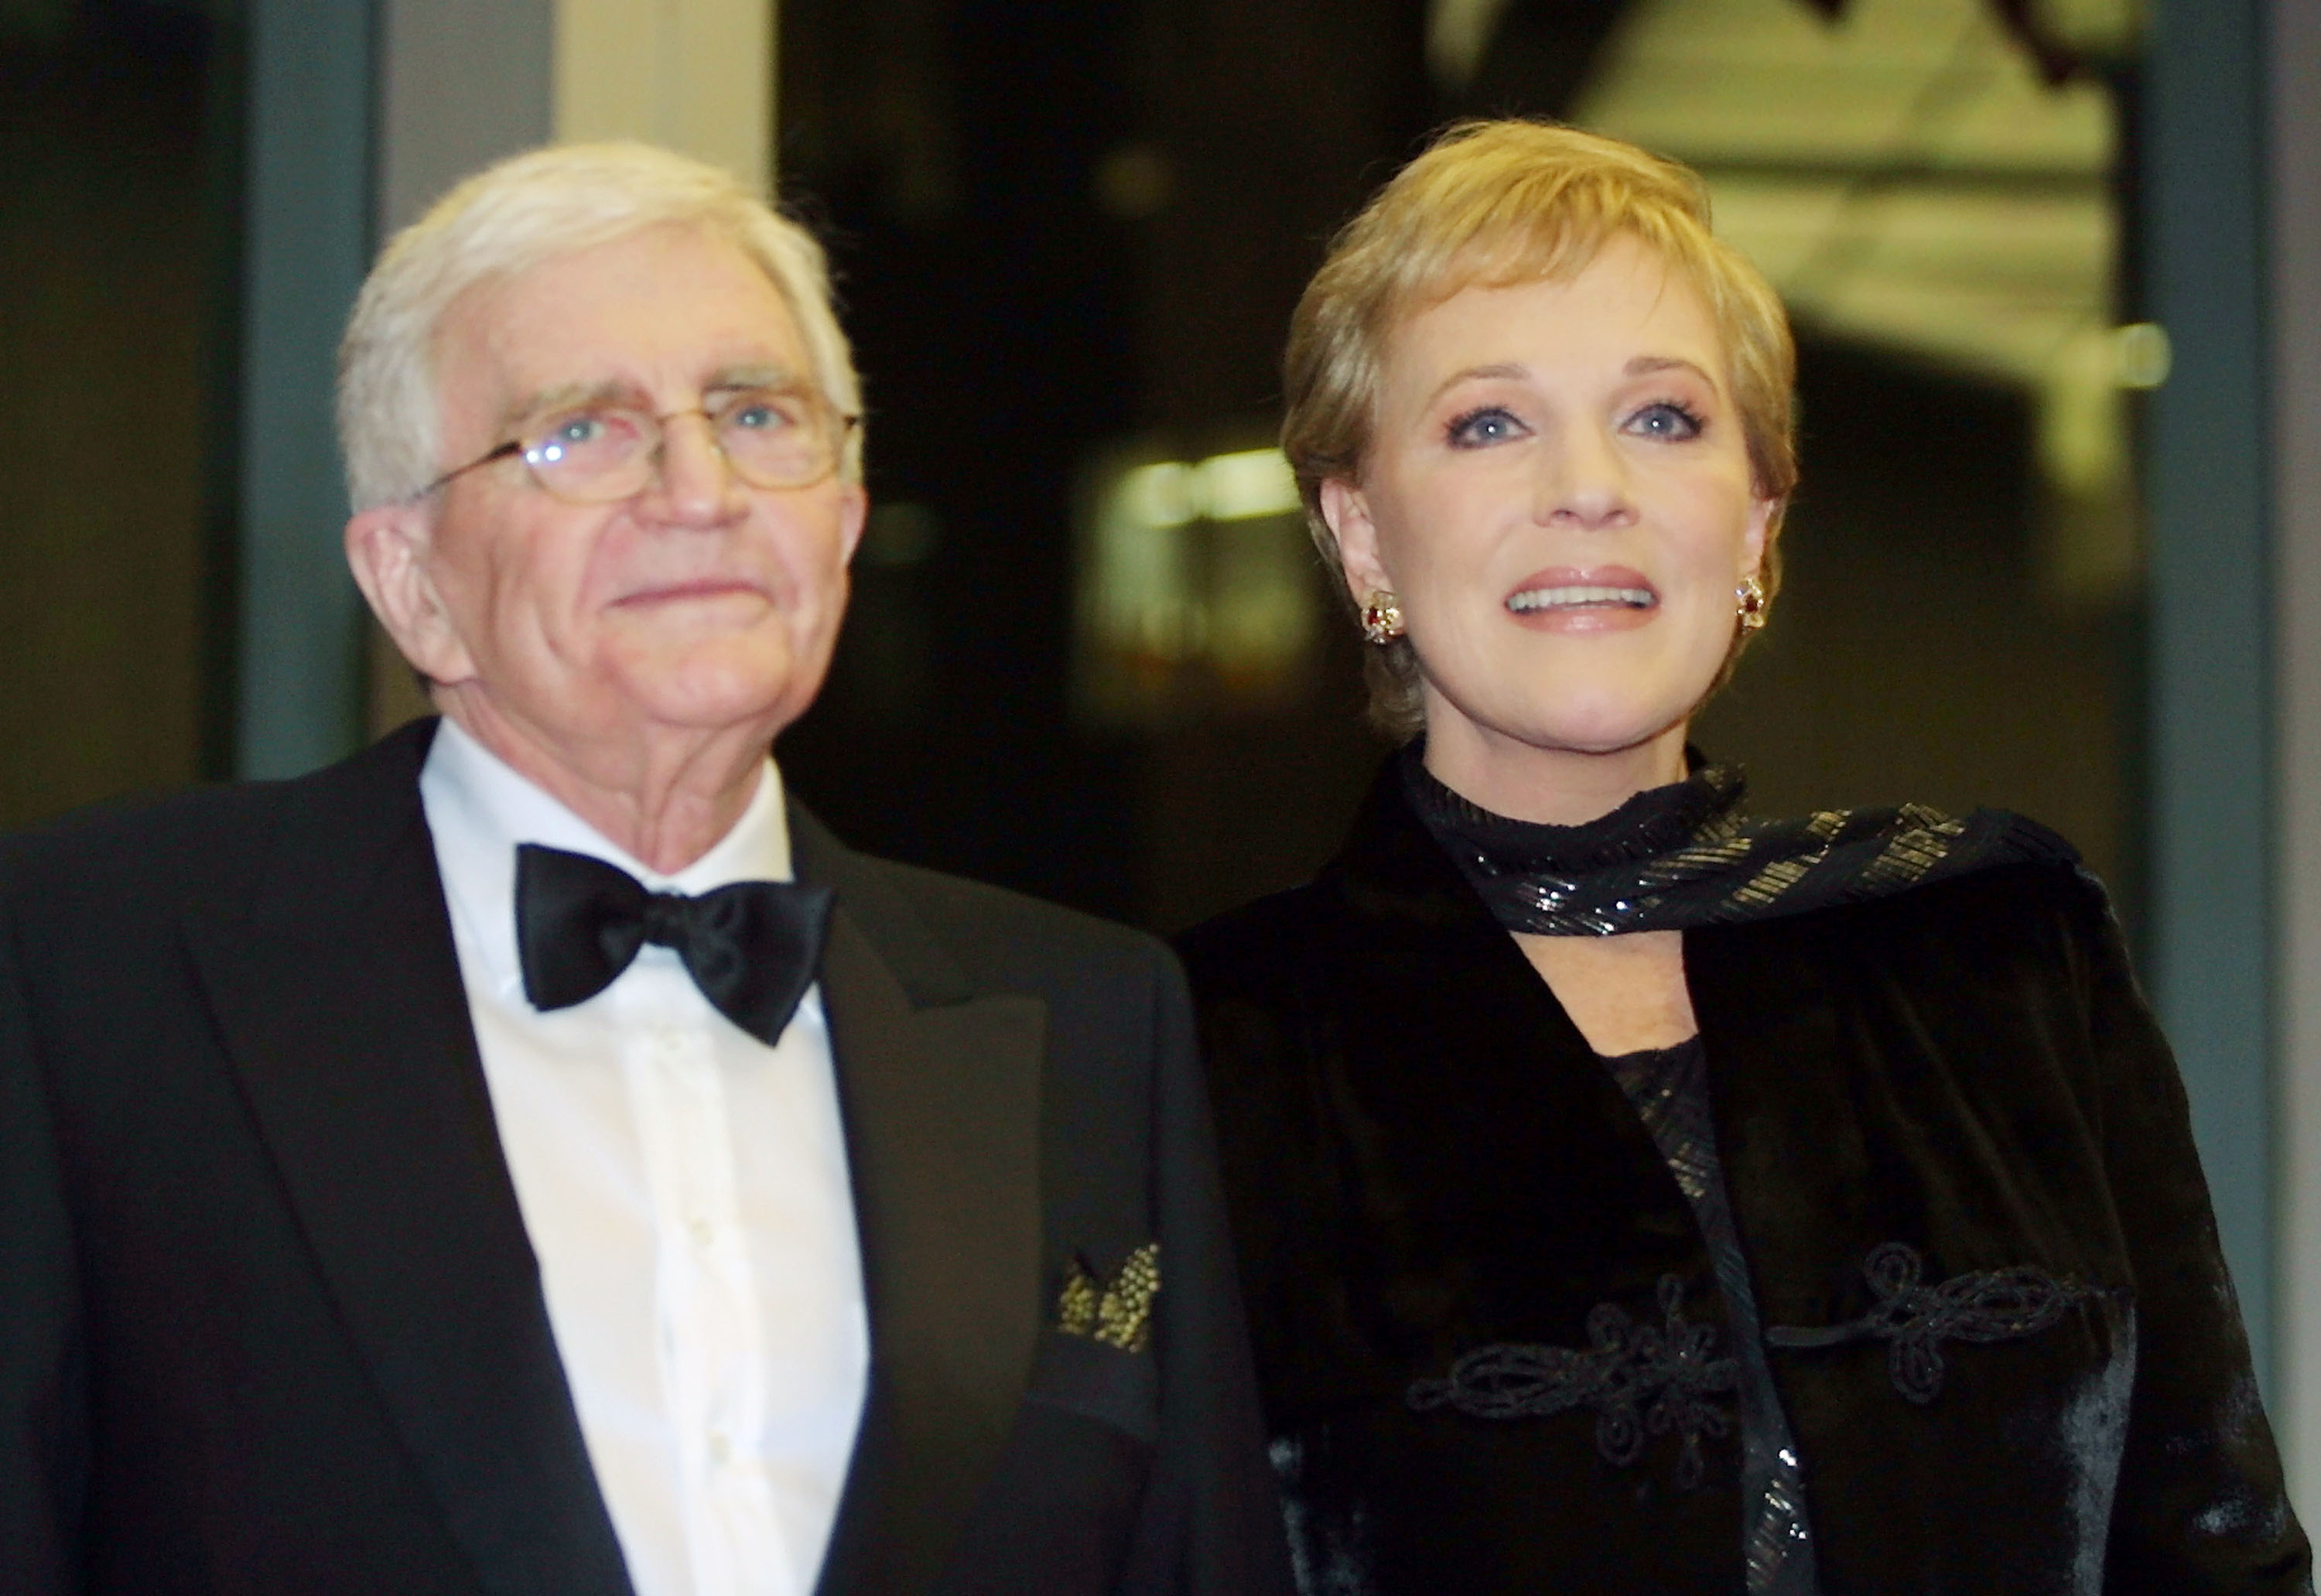 Julie Andrews and Blake Edwards in Washington D.C in 2001 | Source: Getty Images